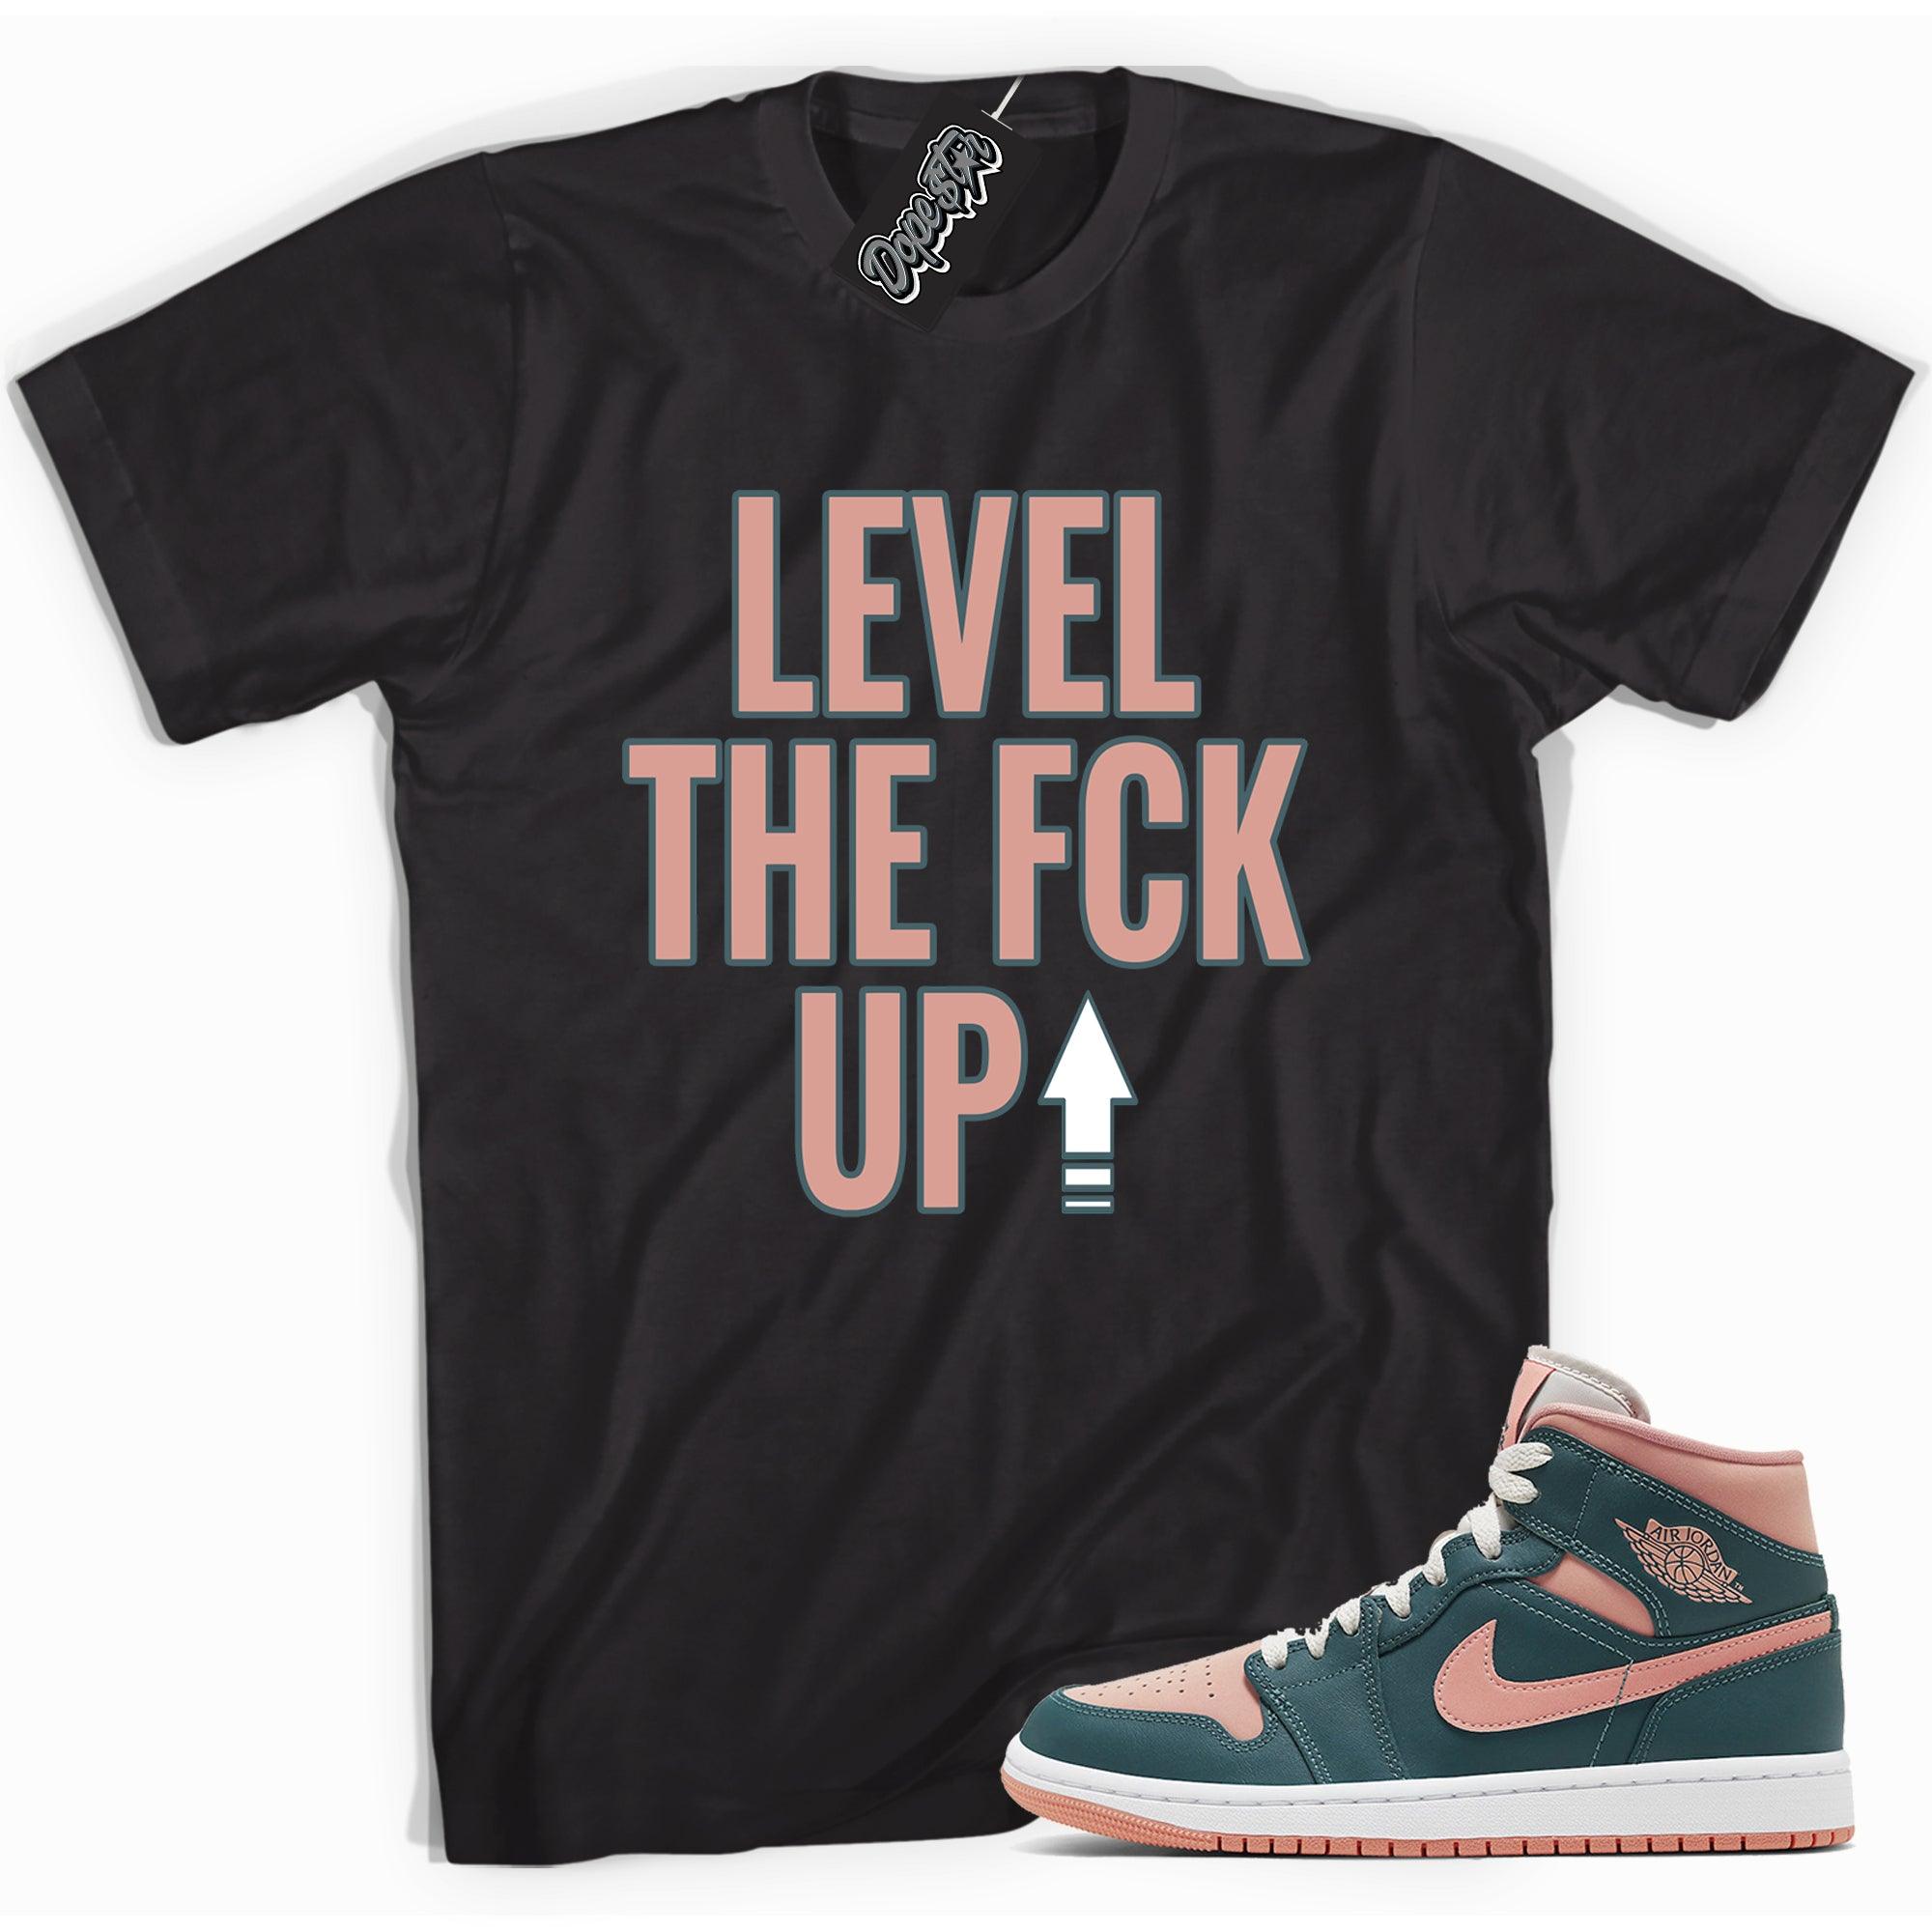 Cool black graphic tee with 'Level Up' print, that perfectly matches Air Jordan 1 Mid Dark Teal Green Toe sneakers.